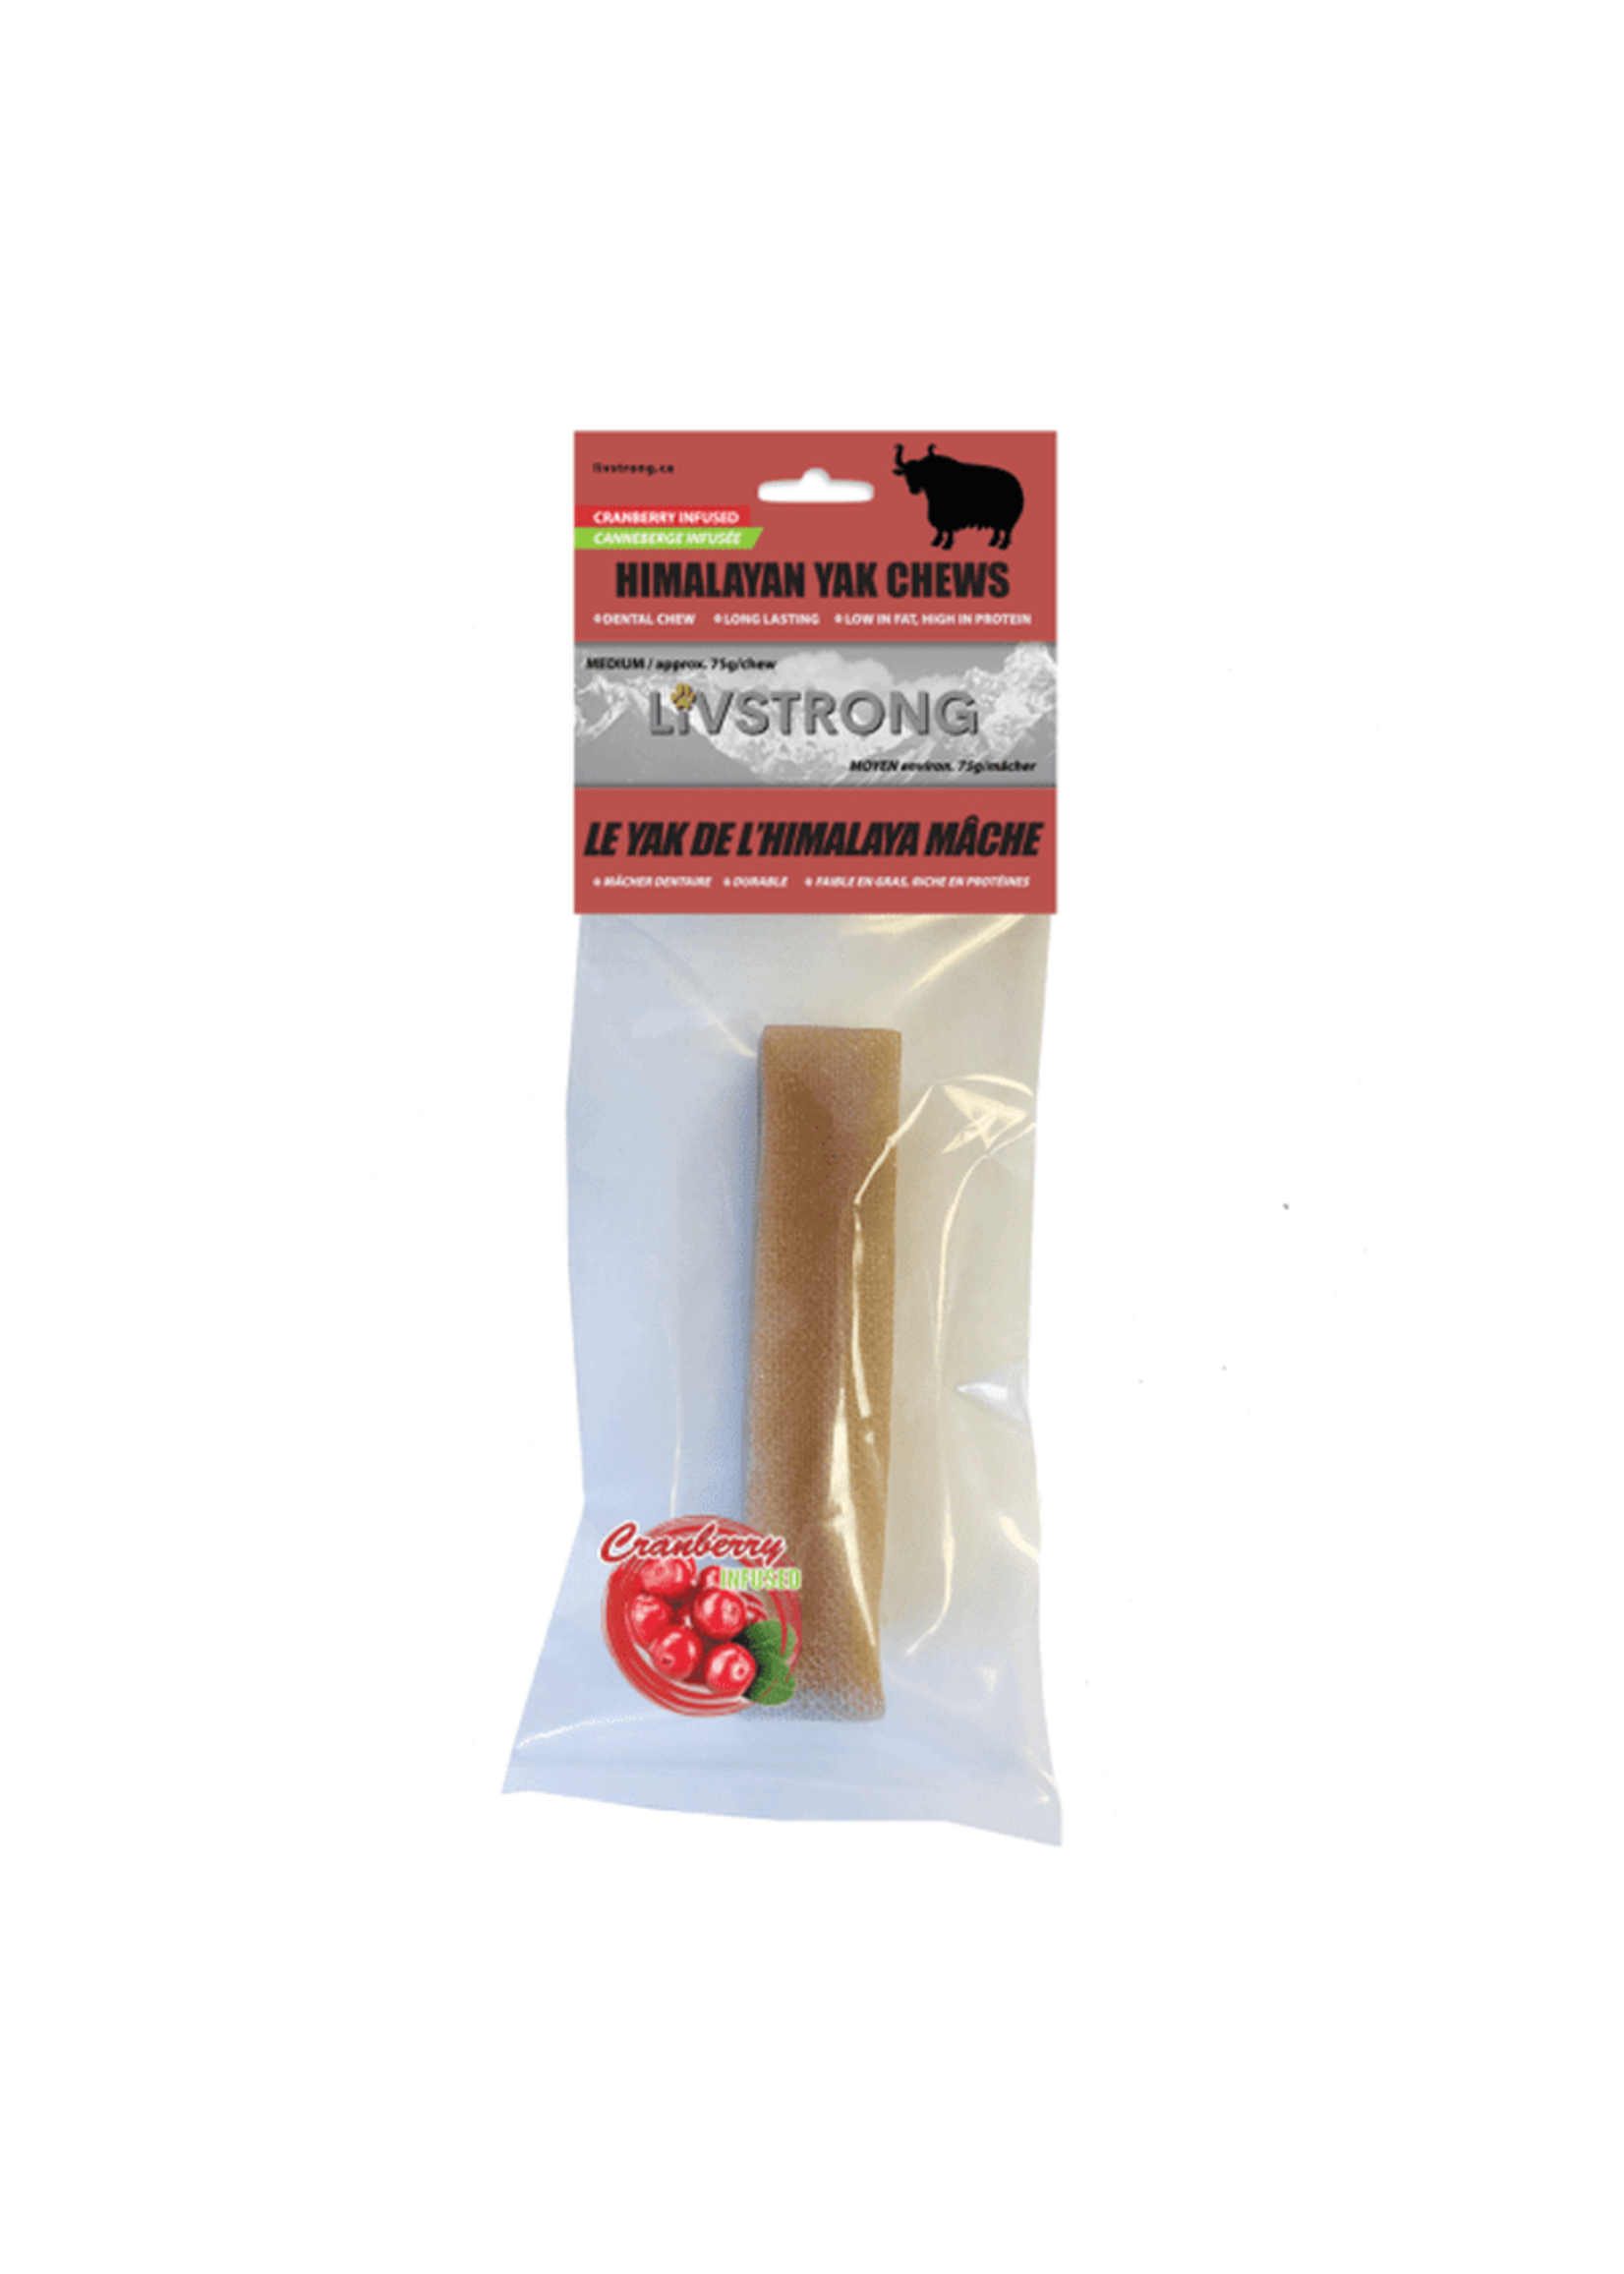 Livstrong Livstrong Himalayan Yak Cheese Infused